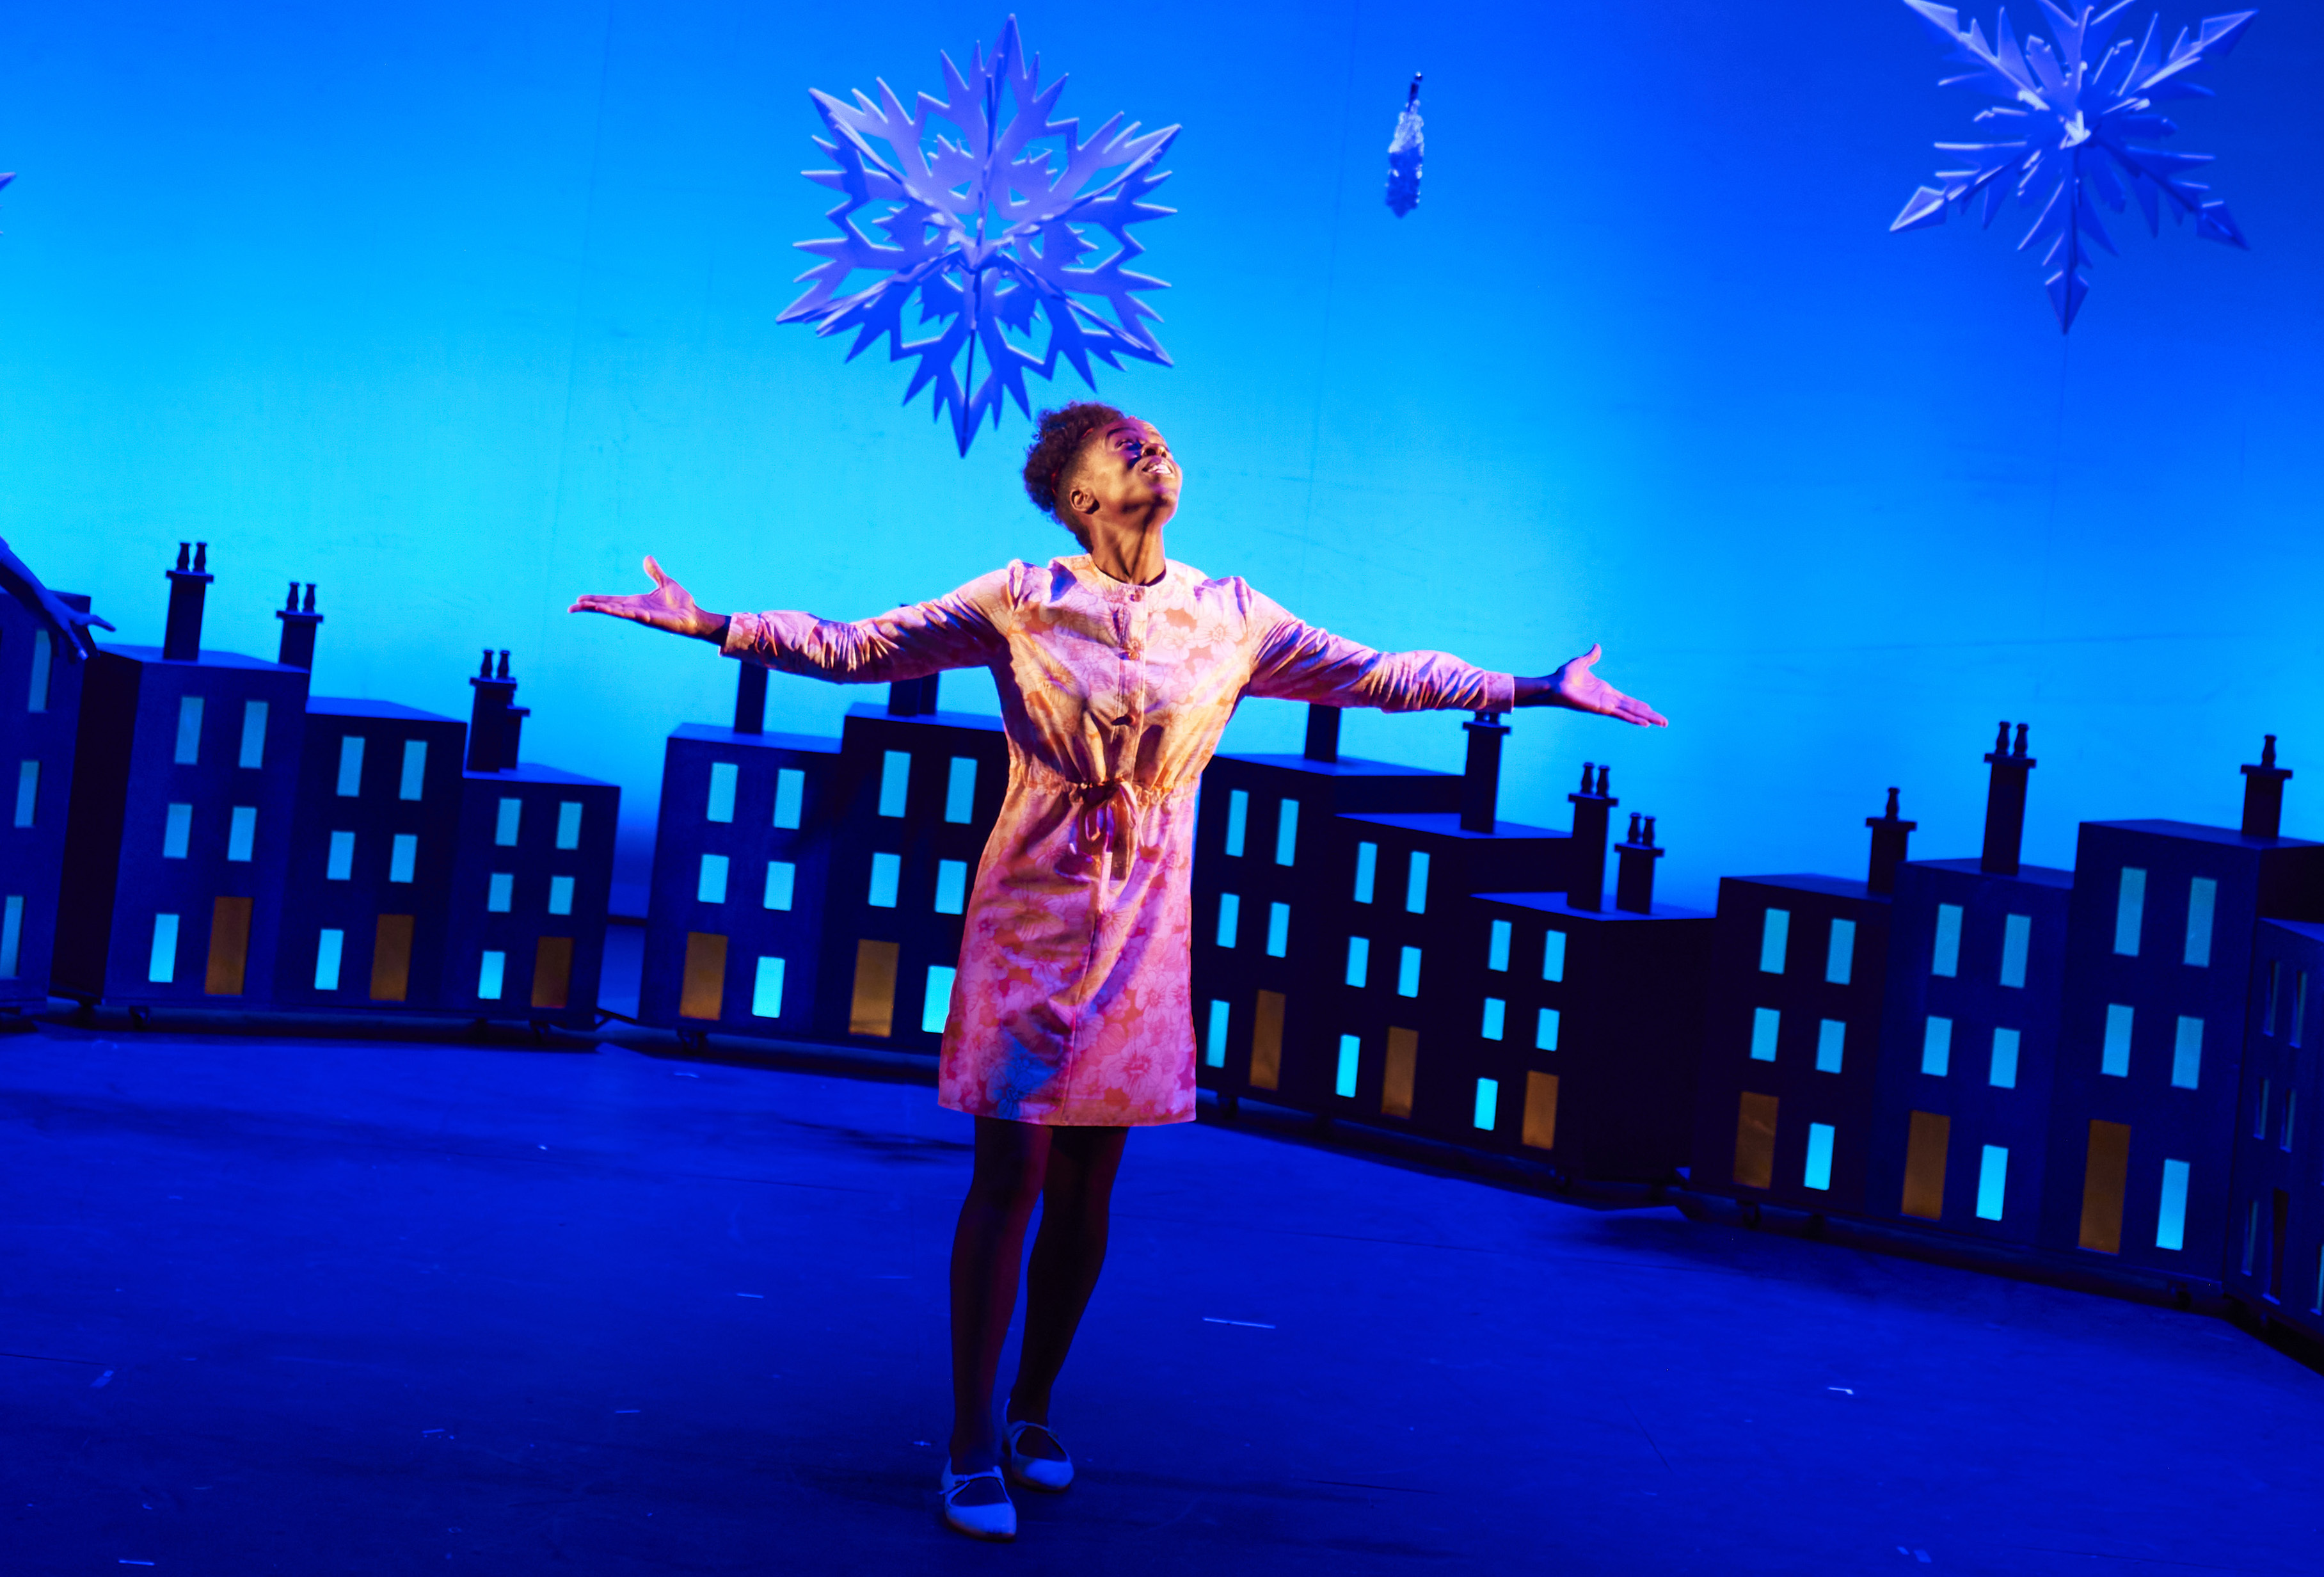 A woman is standing centre stage looking up towards the sky with her arms outstretched. She has her eyes closed and is smiling. In the background is an abstract city scape and in the sky are large icicles.